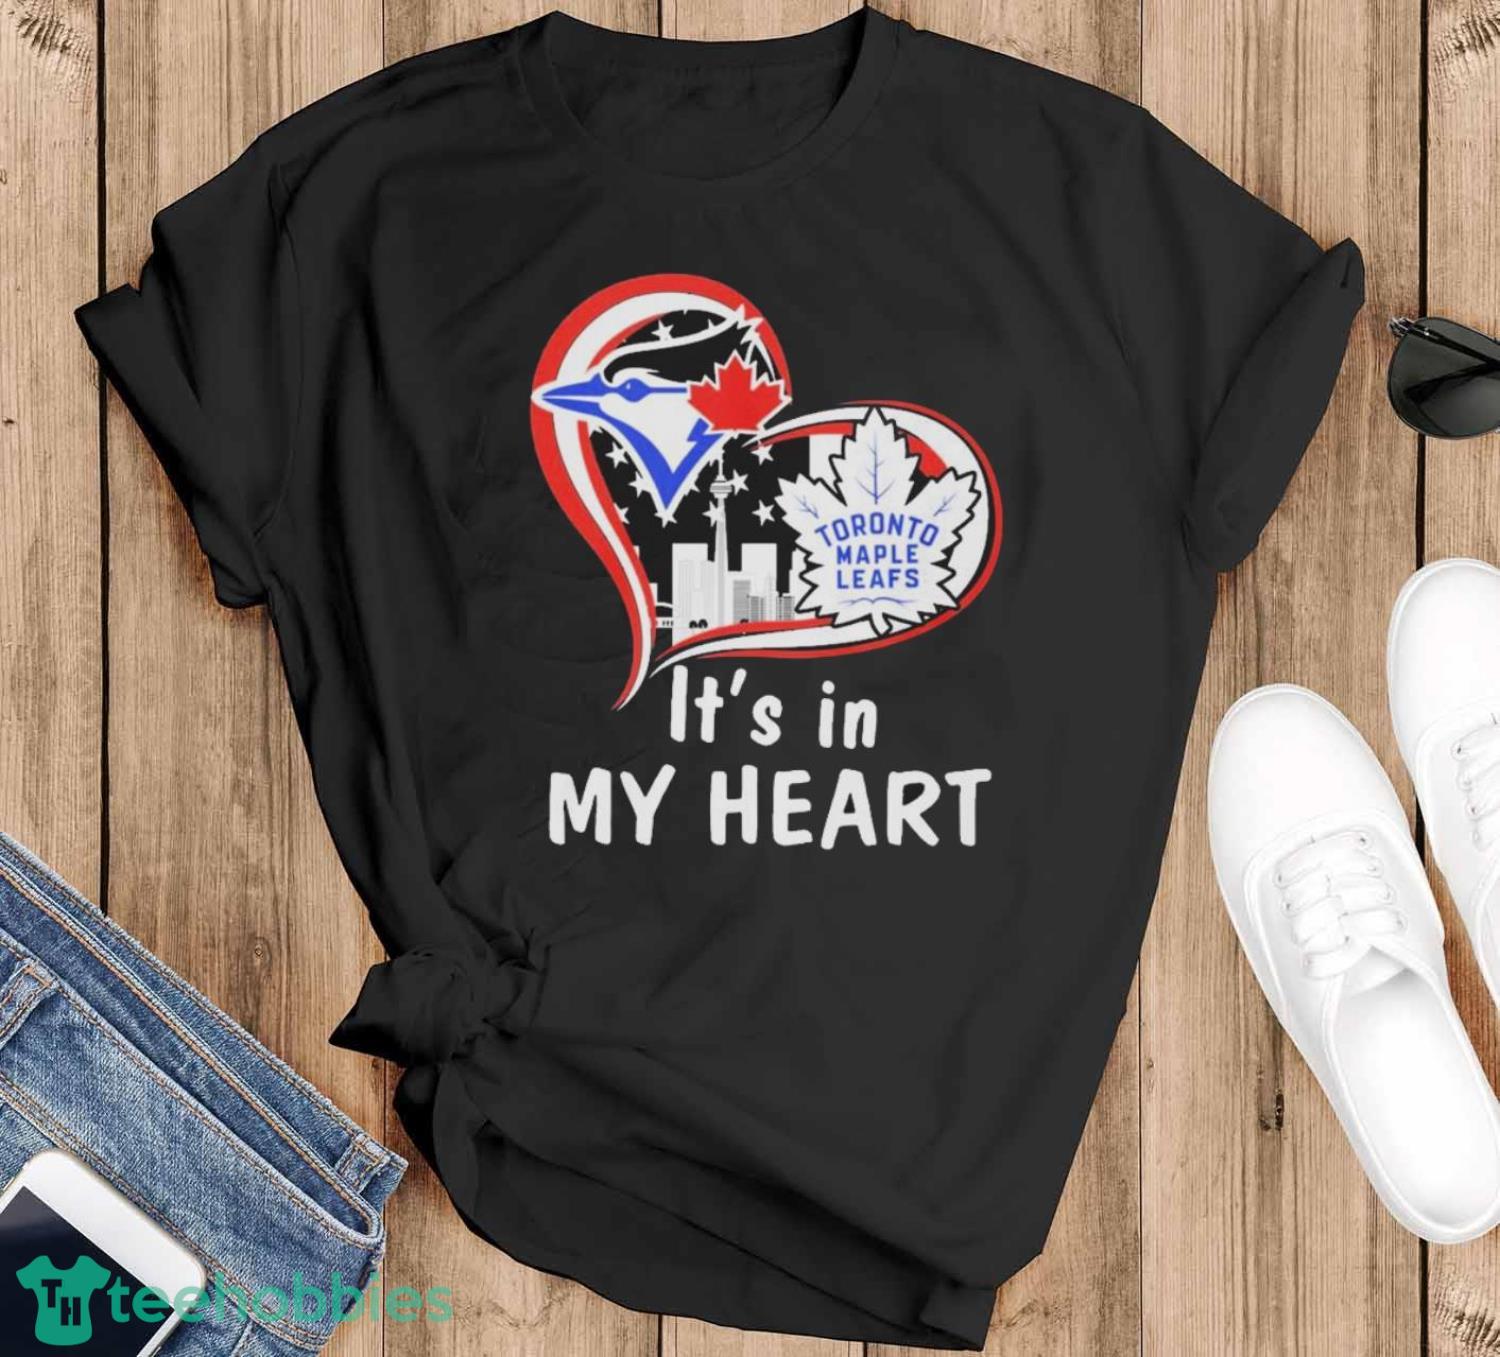 It’s In My Heart Toronto Blue Jays And Toronto Maple Leafs Shirt - Black T-Shirt